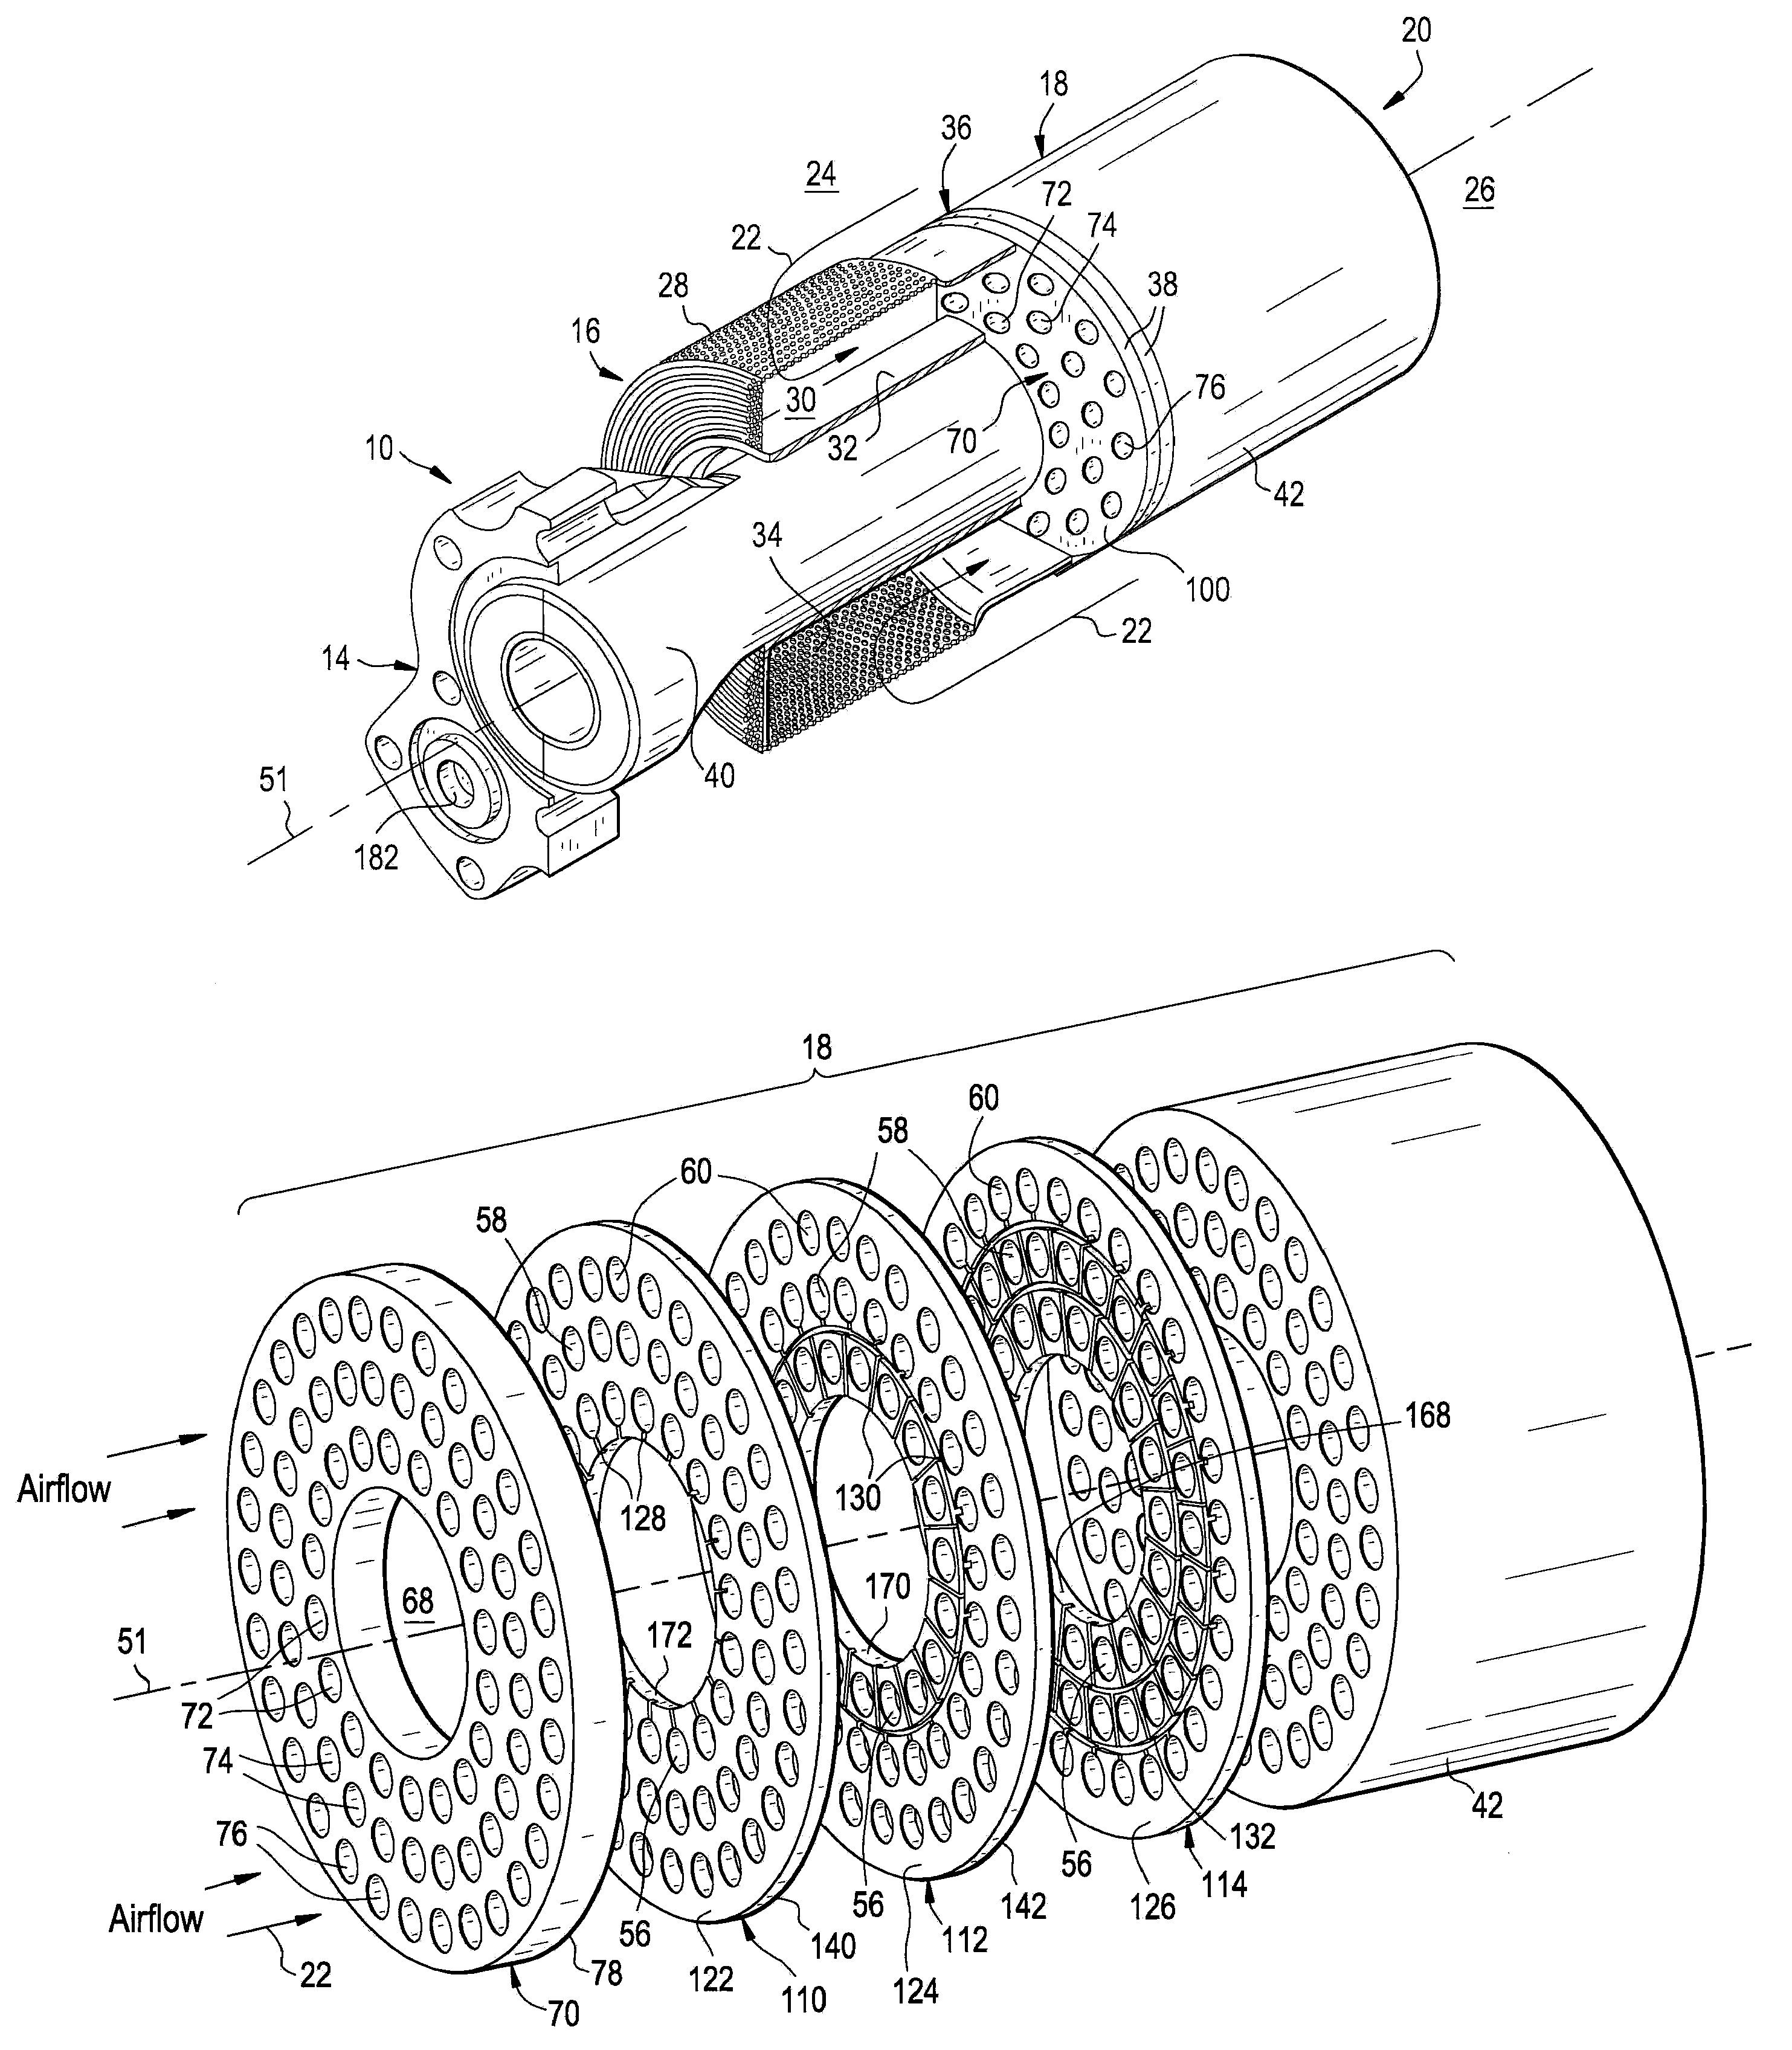 Method and apparatus for delivery of a fuel and combustion air mixture to a gas turbine engine using fuel distribution grooves in a manifold disk with discrete air passages